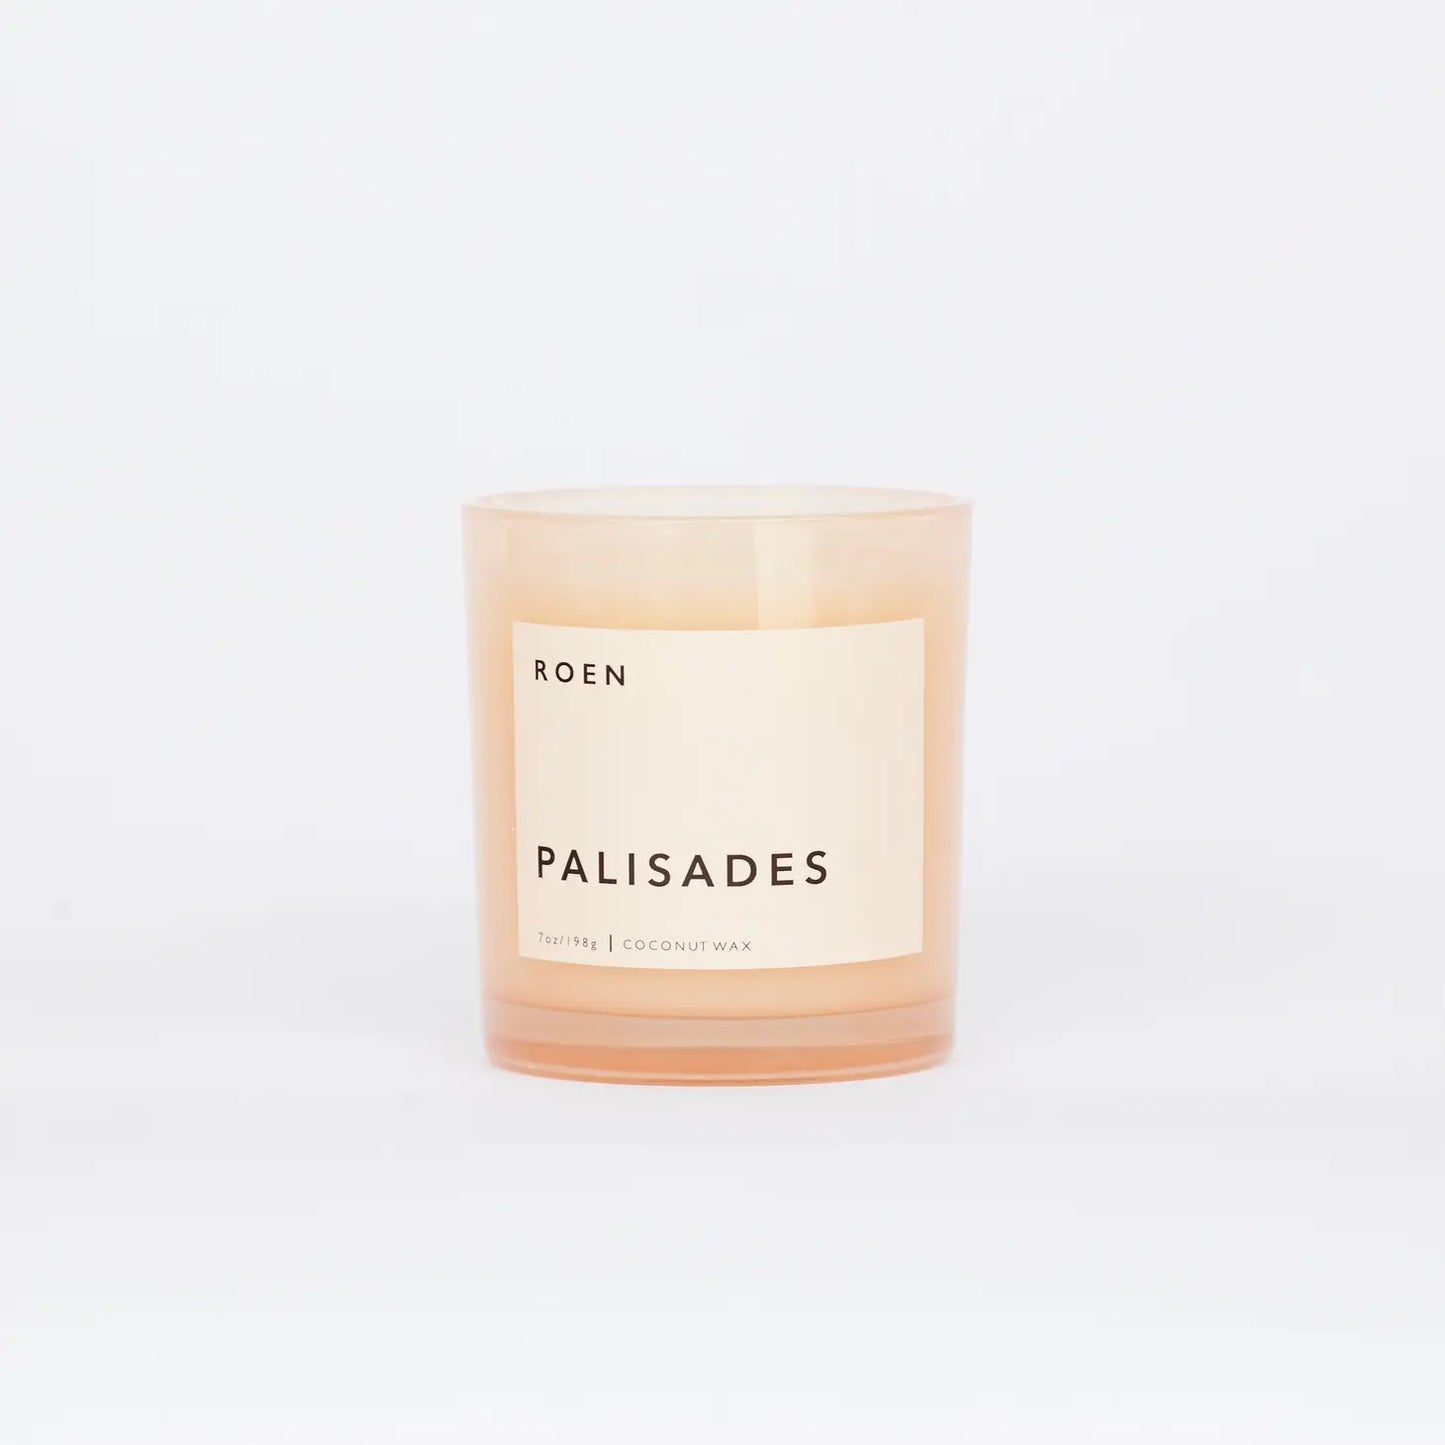 ROEN Palisades Candle